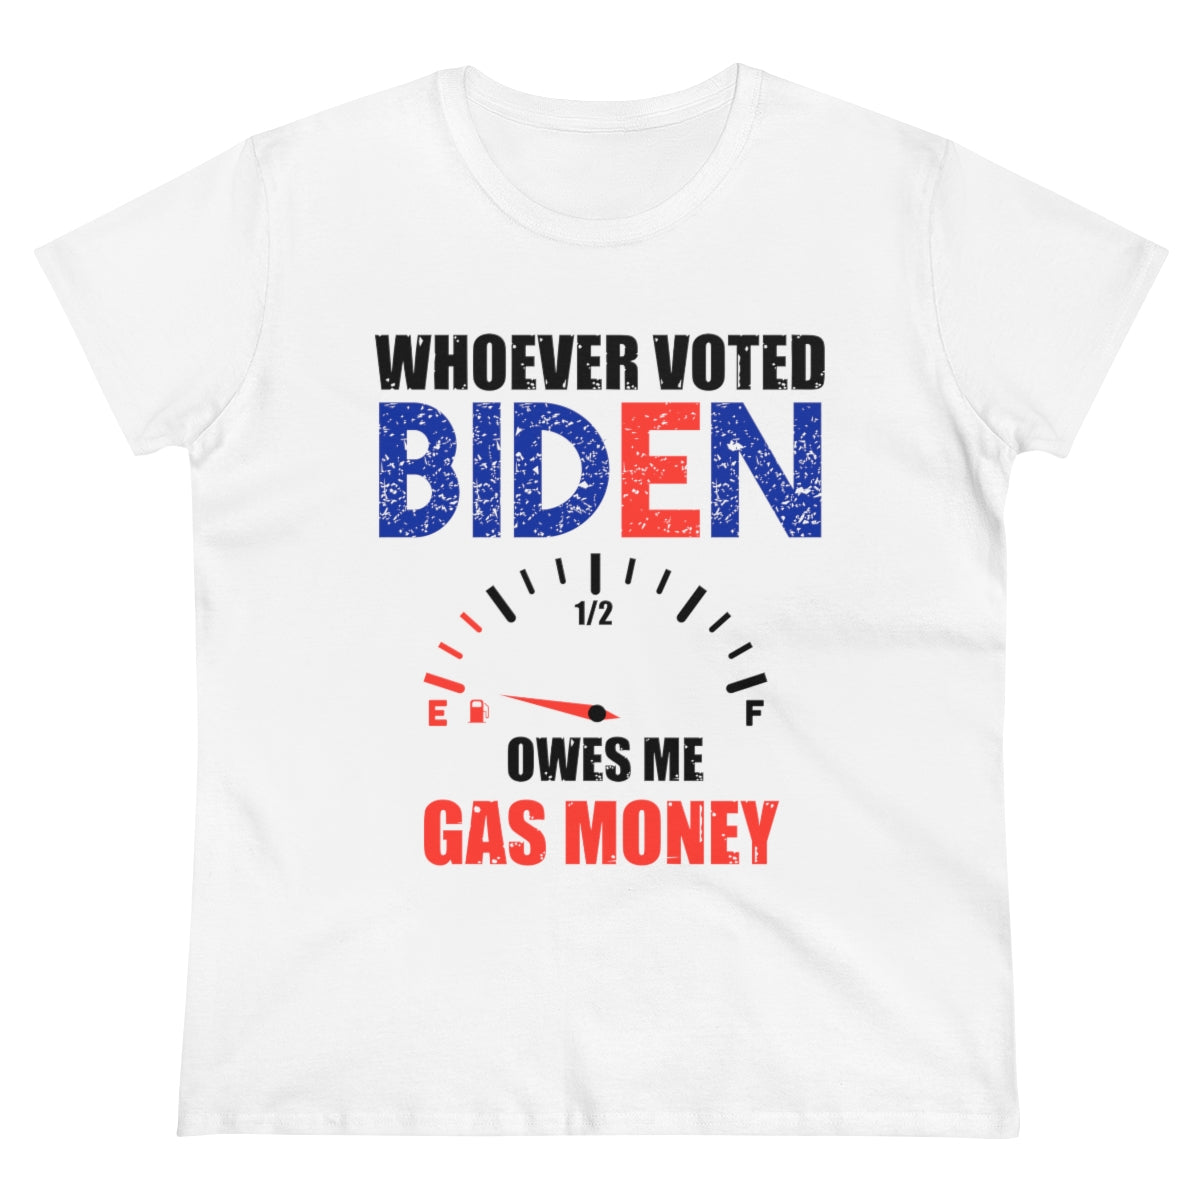 Whoever Voted Biden Owes Me Gas Money | Women's Cotton Tee - Rise of The New Media